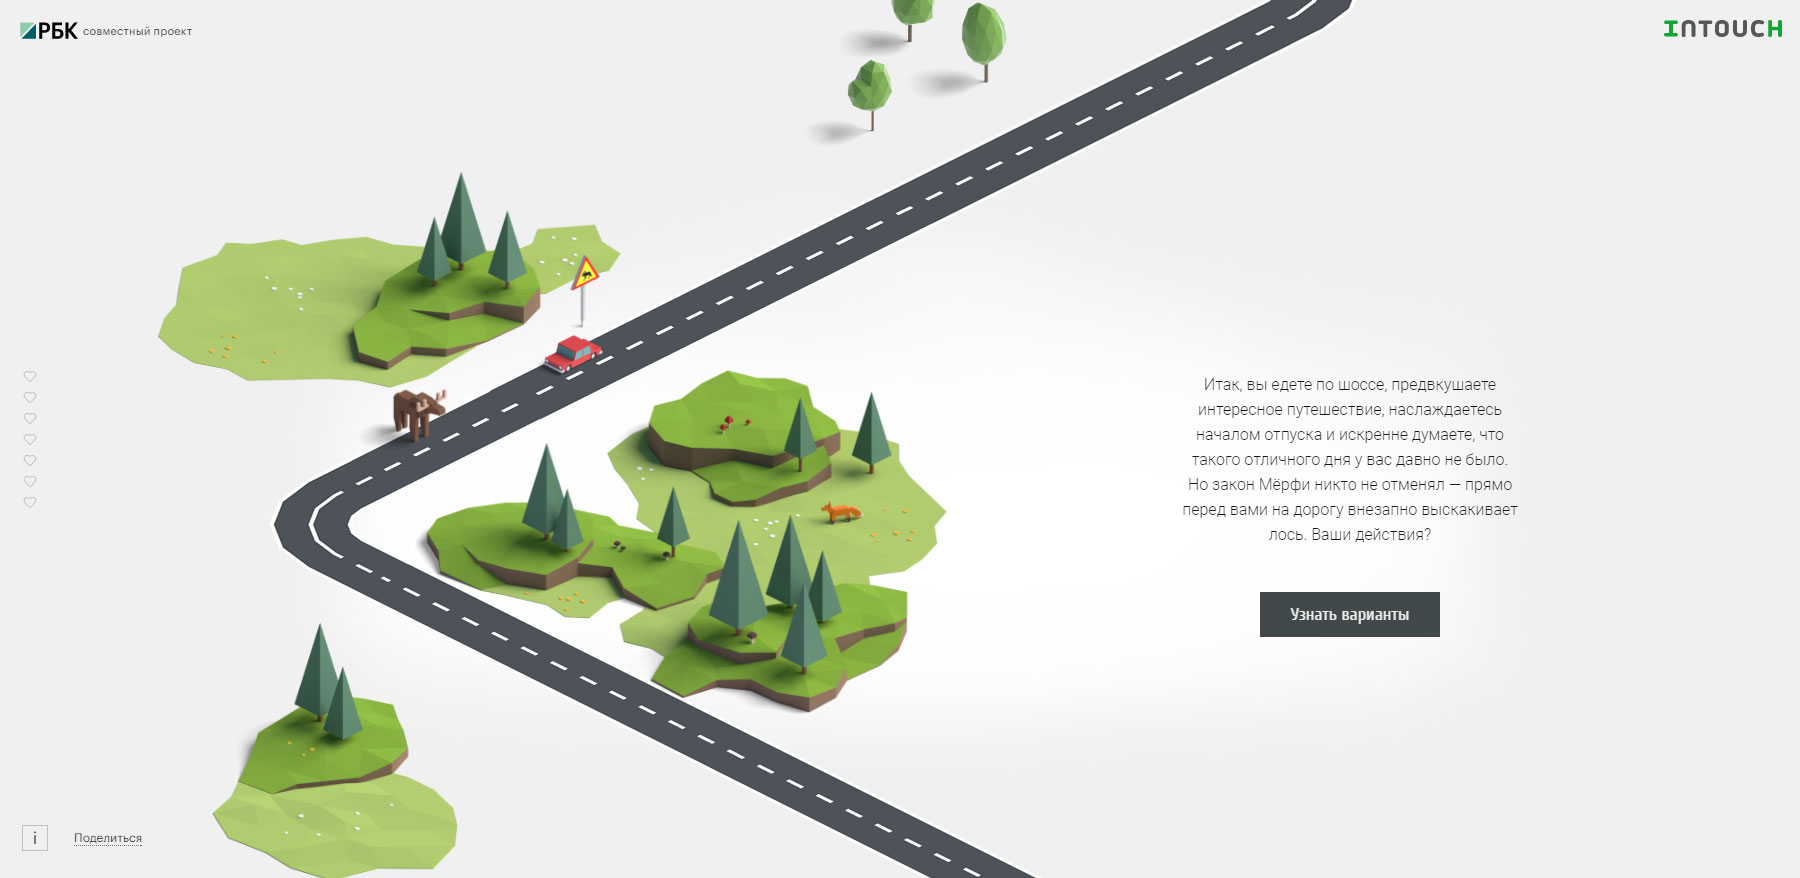 Road Adventures. Driving Test. - Website of the Day